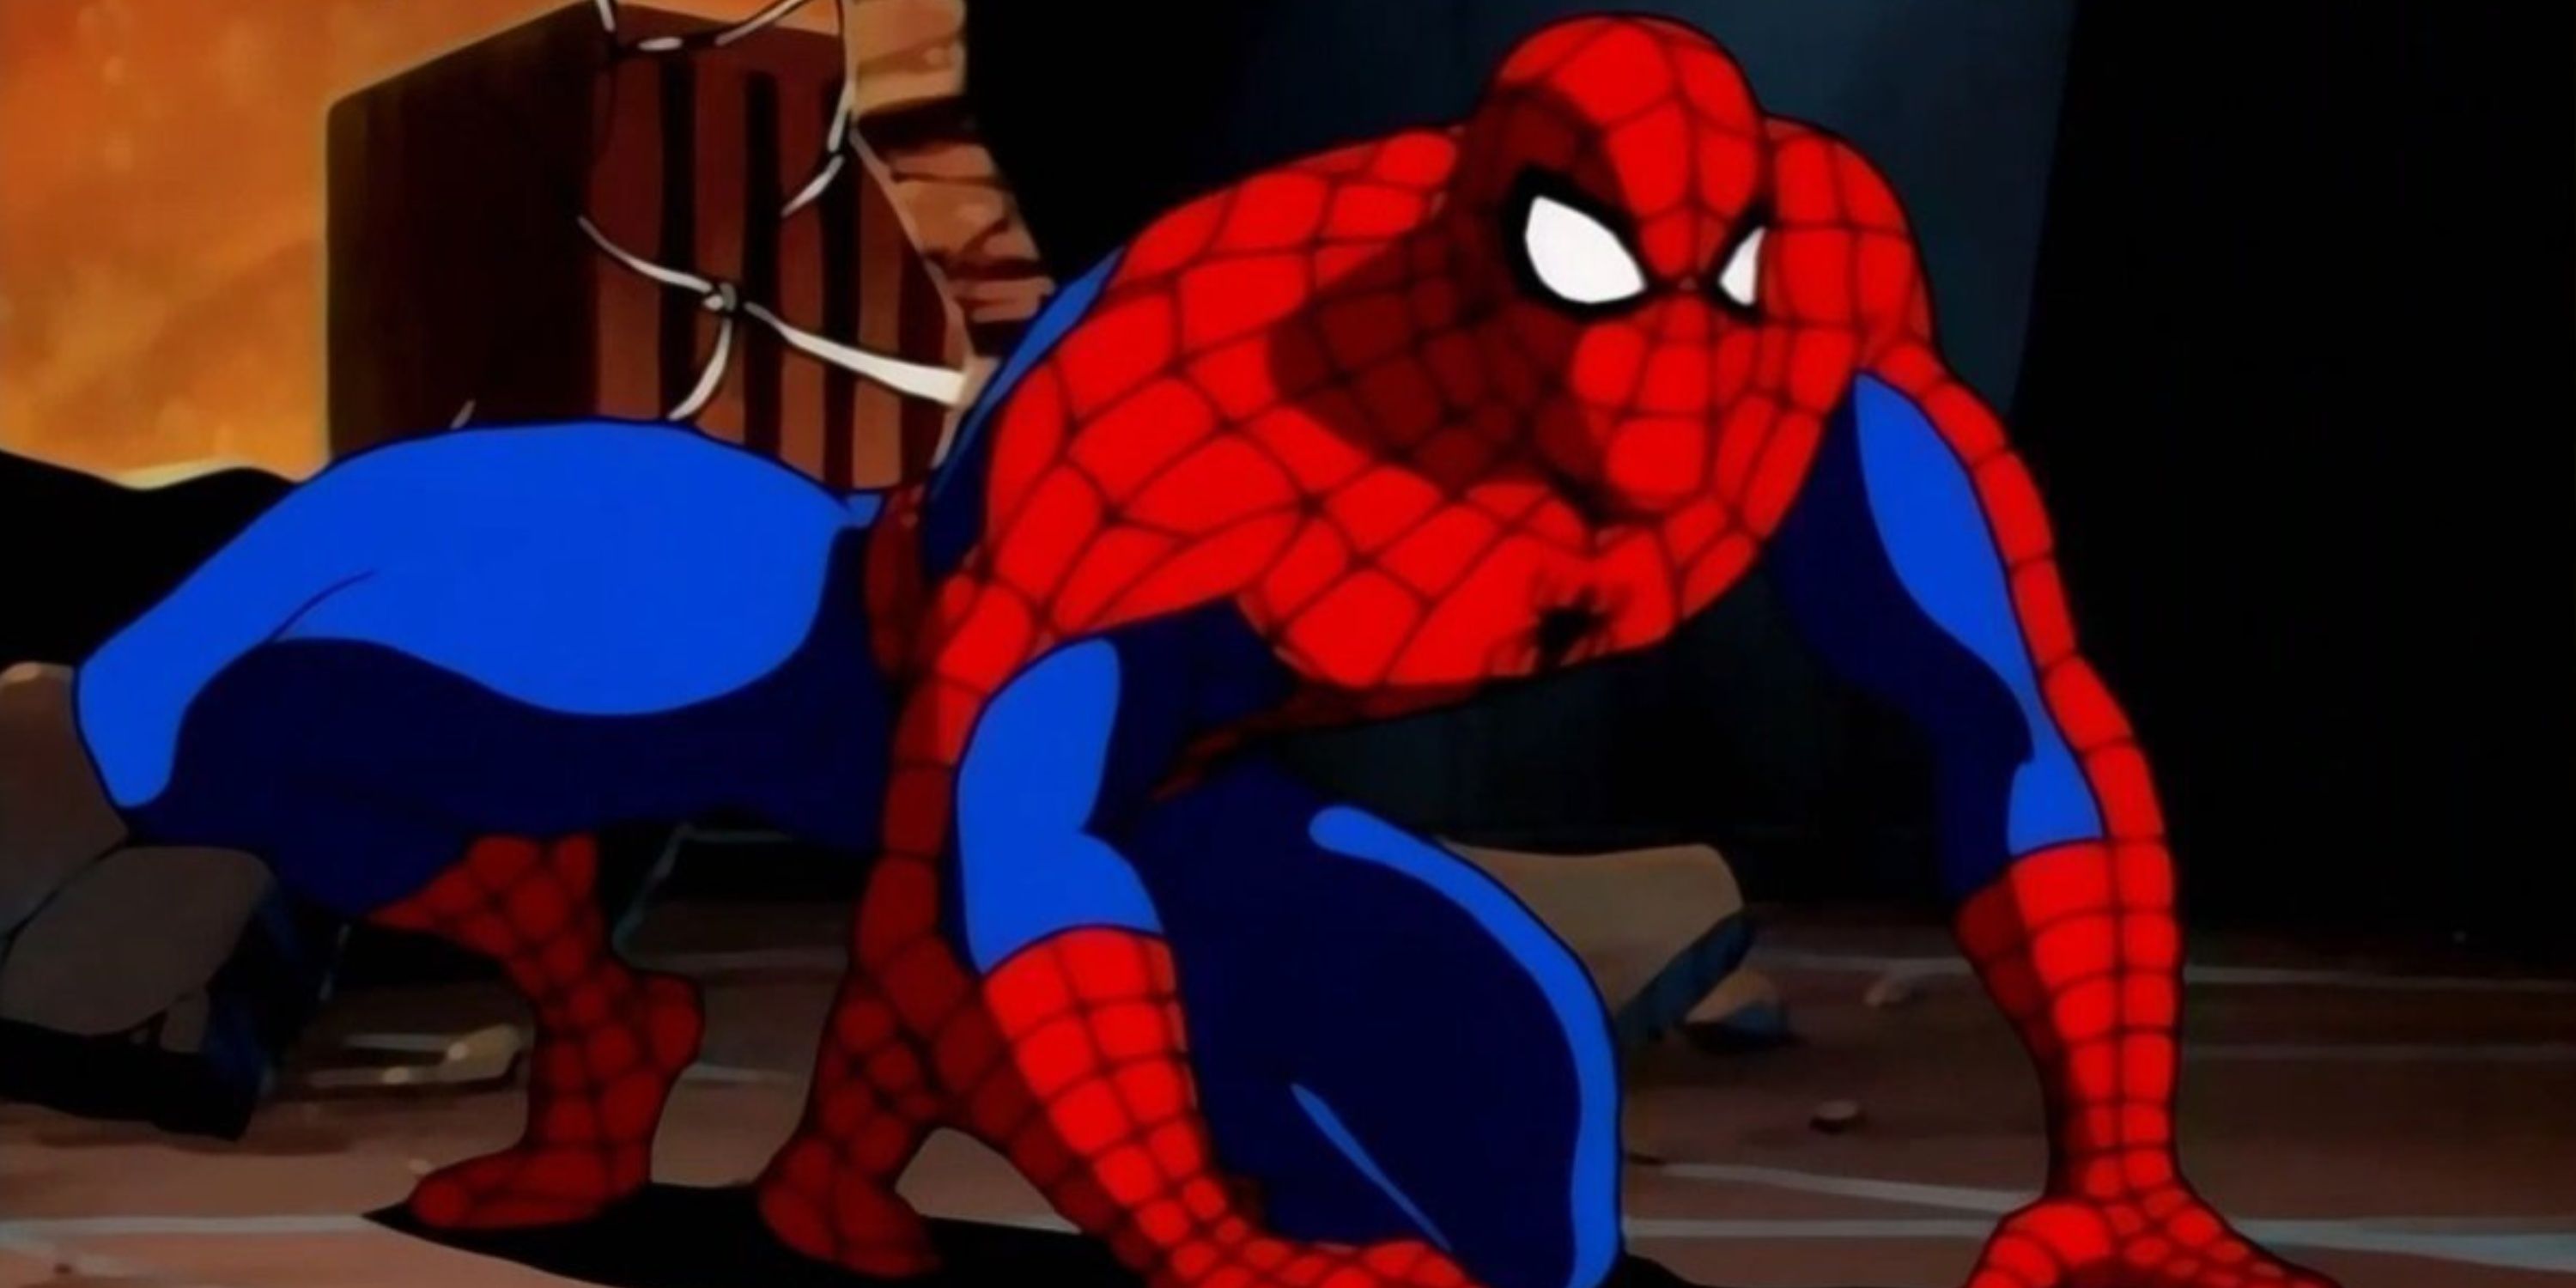 Spider-Man crouching in Spider-Man The Animated Series